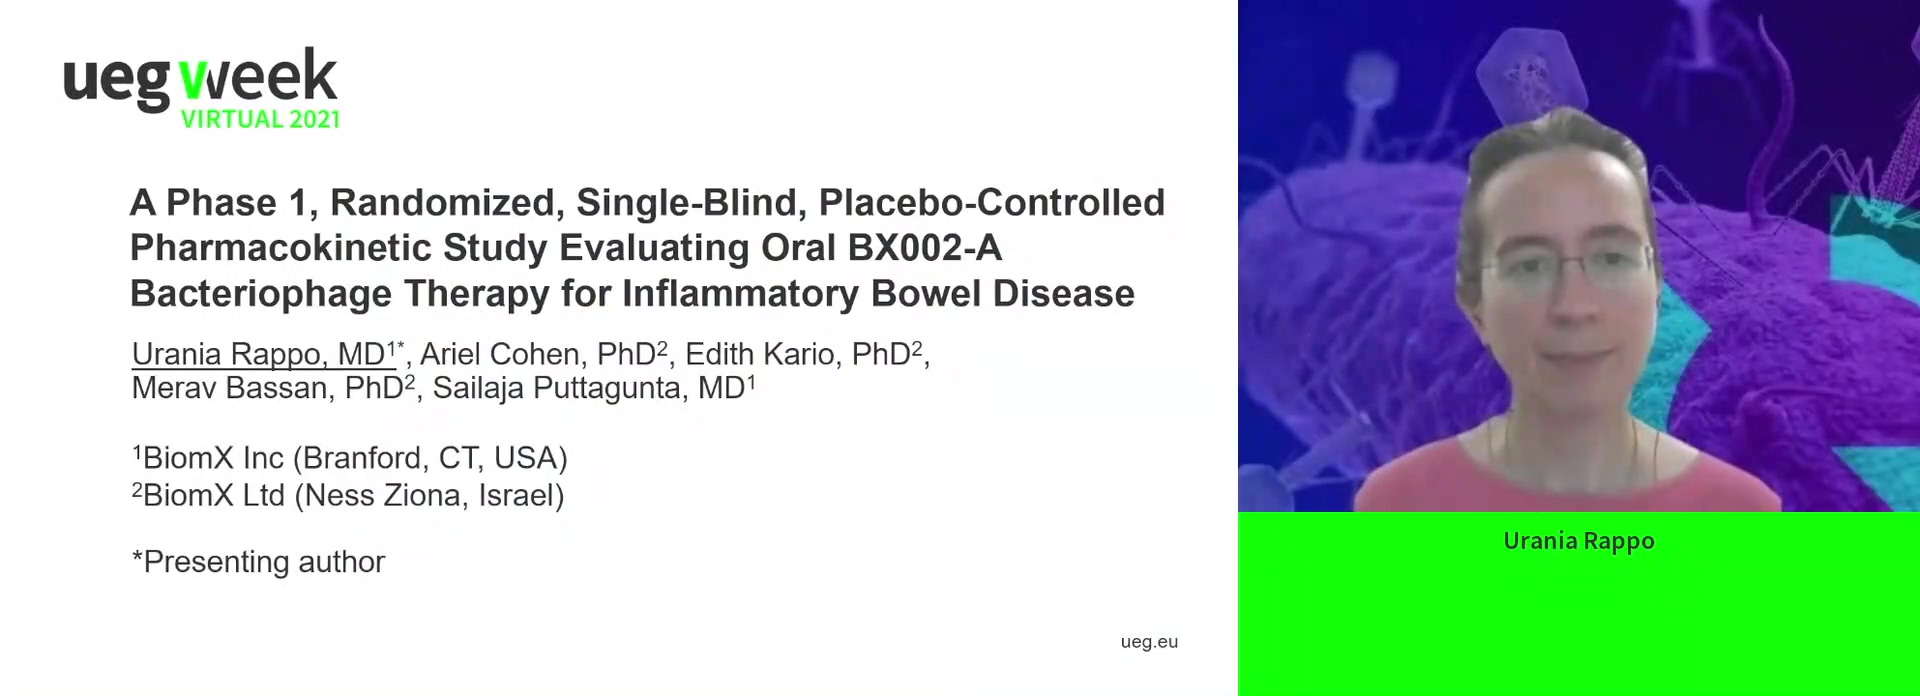 A PHASE 1, RANDOMIZED, SINGLE-BLIND, PLACEBO-CONTROLLED PHARMACOKINETIC STUDY EVALUATING ORAL BX002-A BACTERIOPHAGE THERAPY FOR INFLAMMATORY BOWEL DISEASE